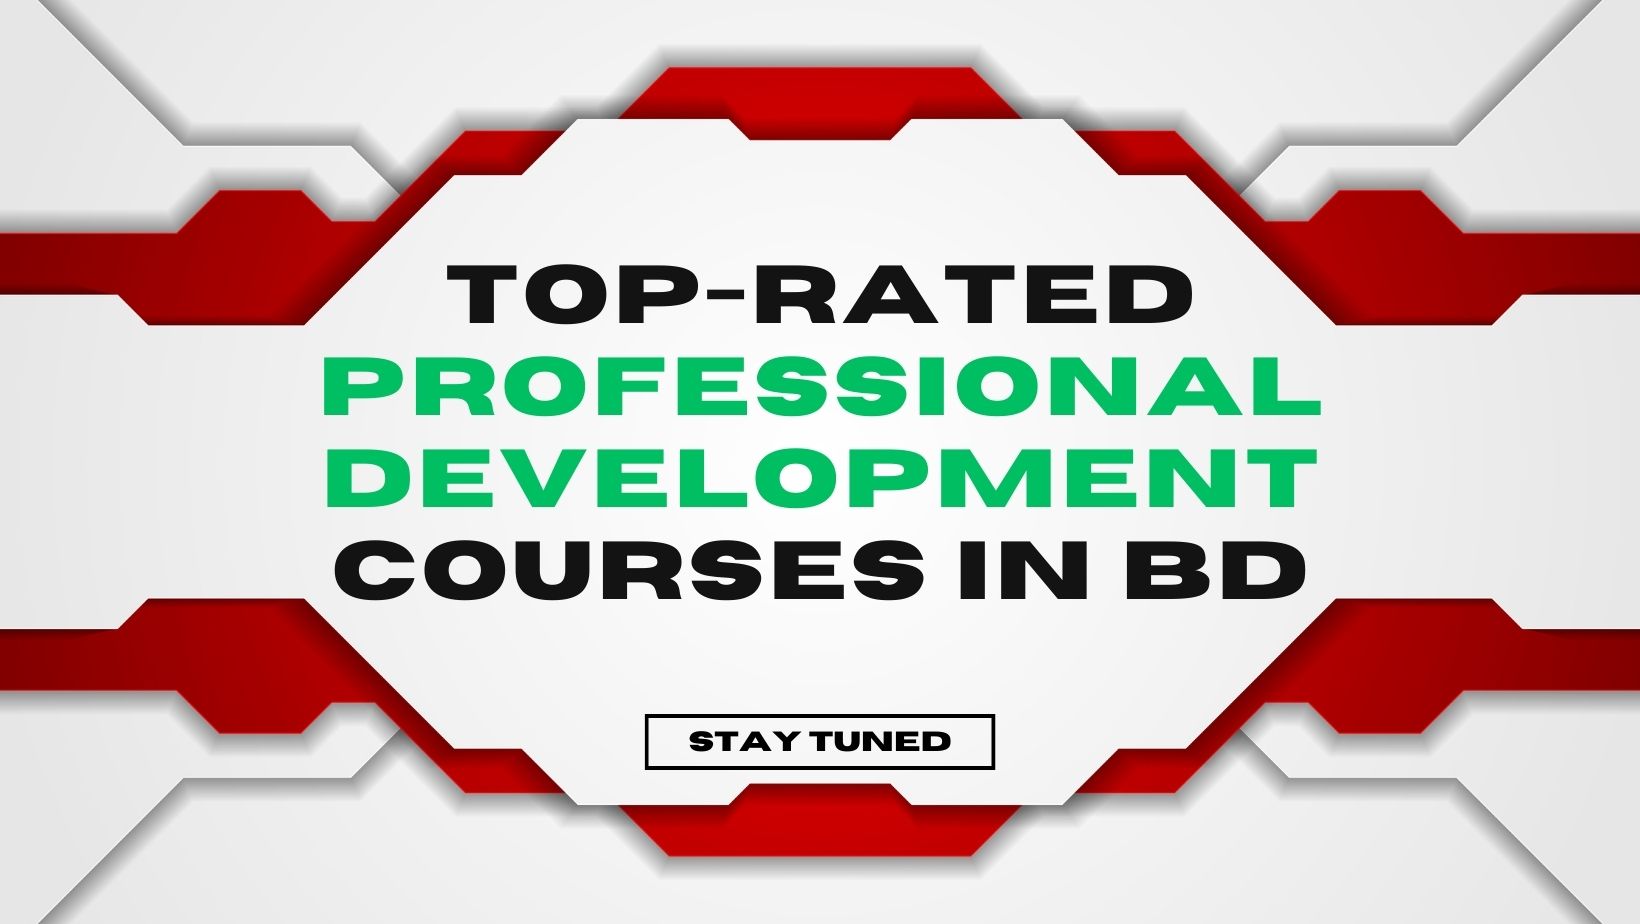 Top-rated Professional Development Courses in BD